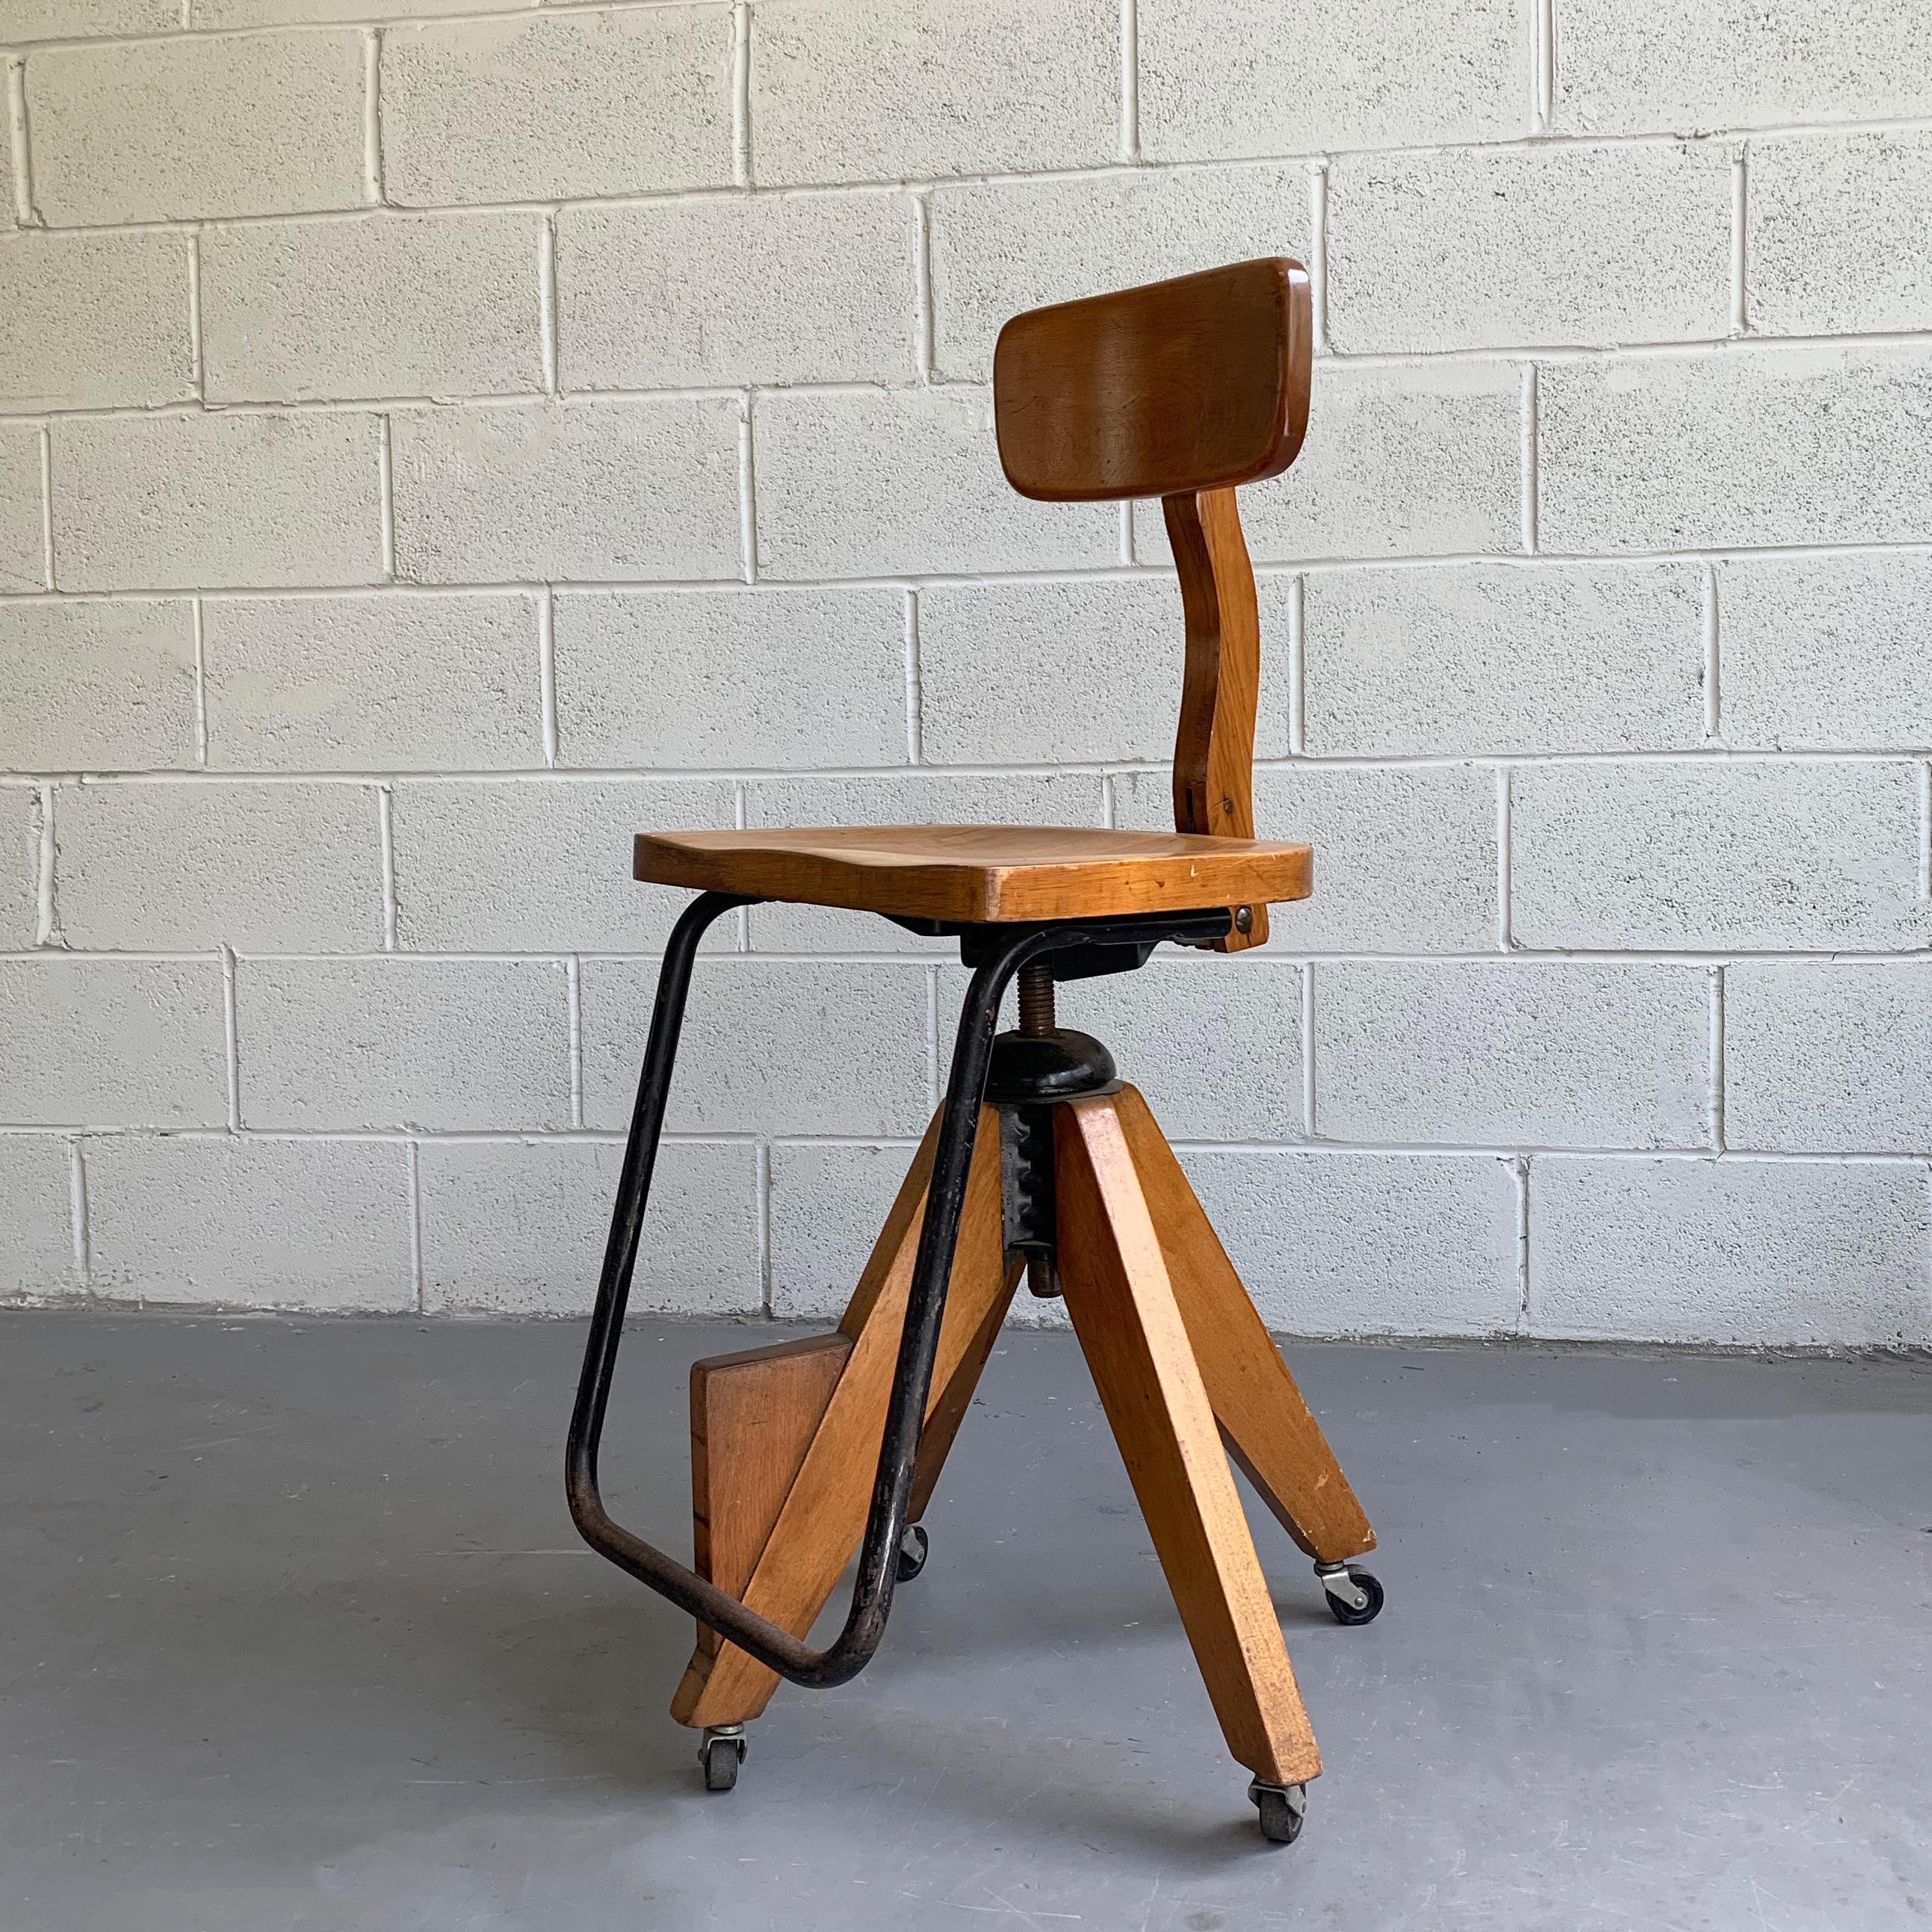 Stylish, Mid-Century Modern, maple, rolling, drafting stool in the style of Jean Prouve features an elongated, iron footrest, contoured, swivel seat at 17 inches wide x 13 inches deep and height adjustable from 22 - 27 inches.